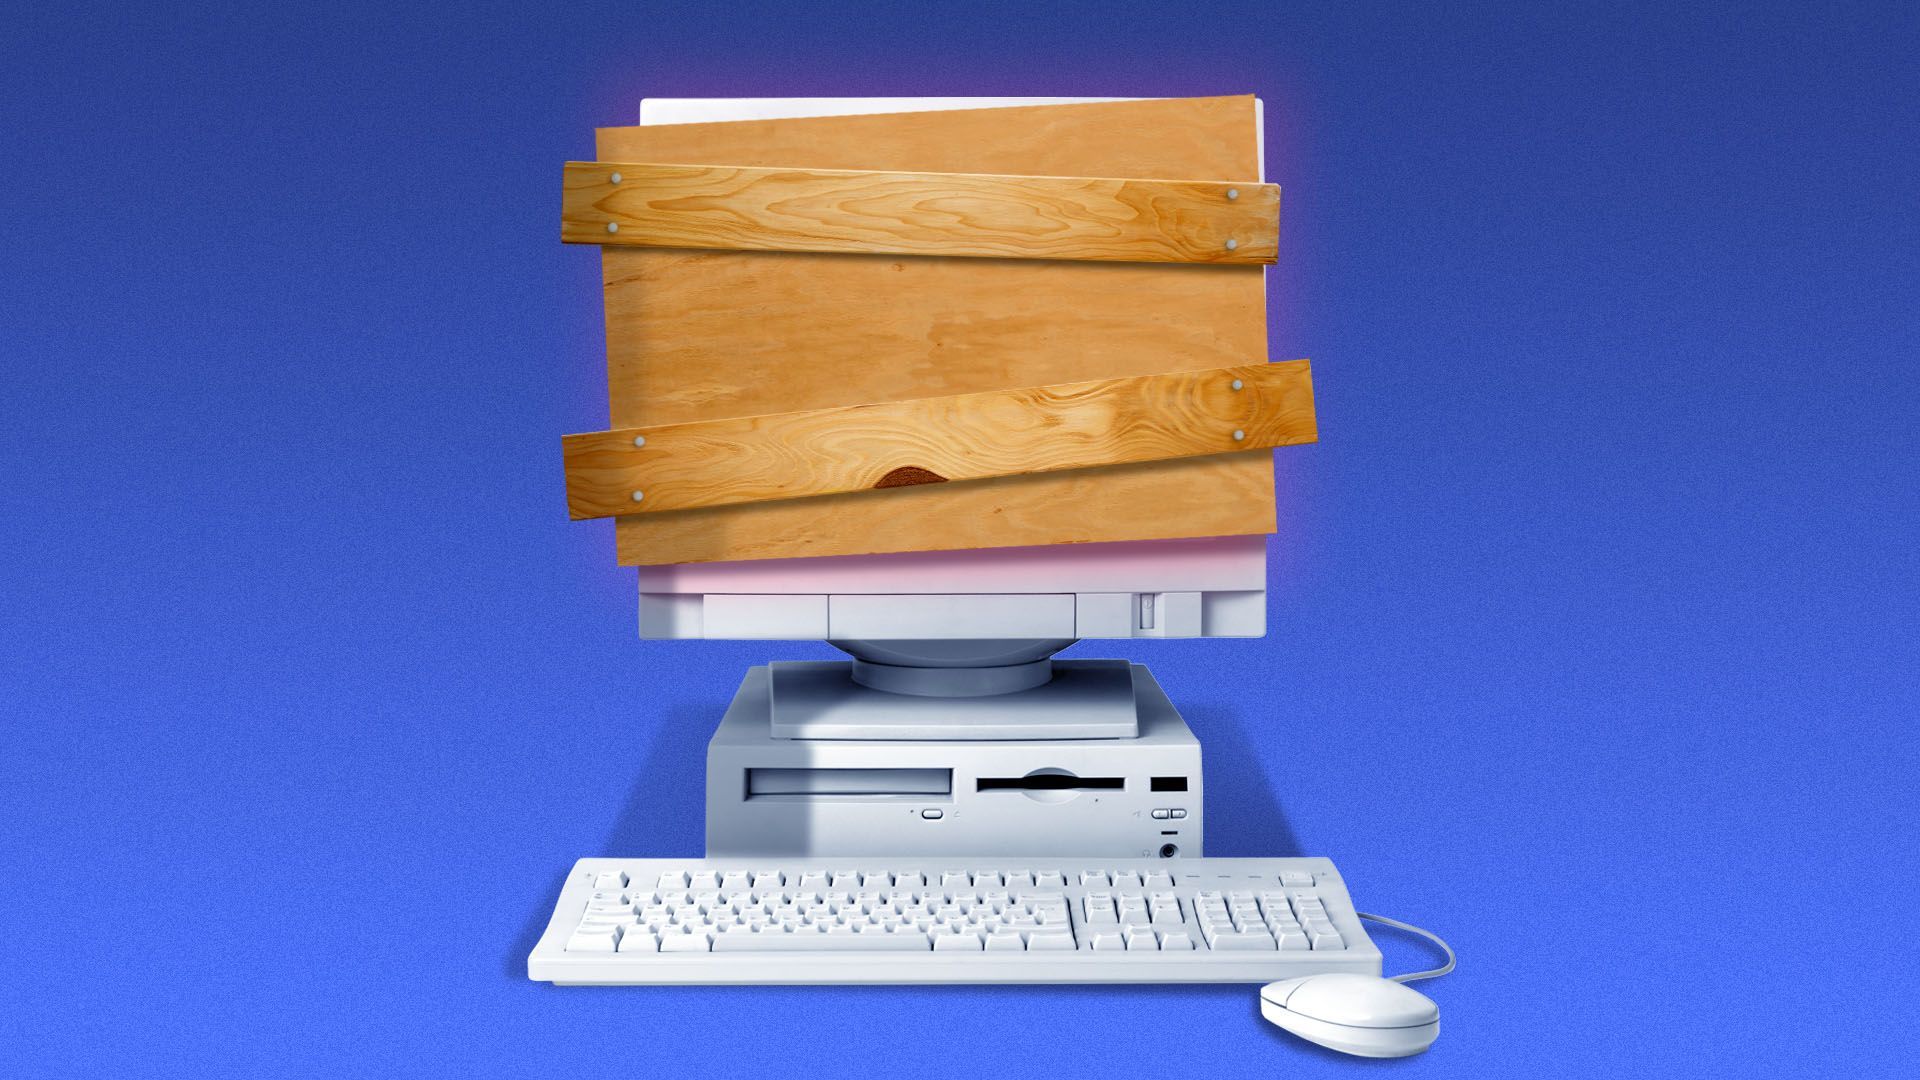 Illustration of a computer with plywood and wood planks over the screen